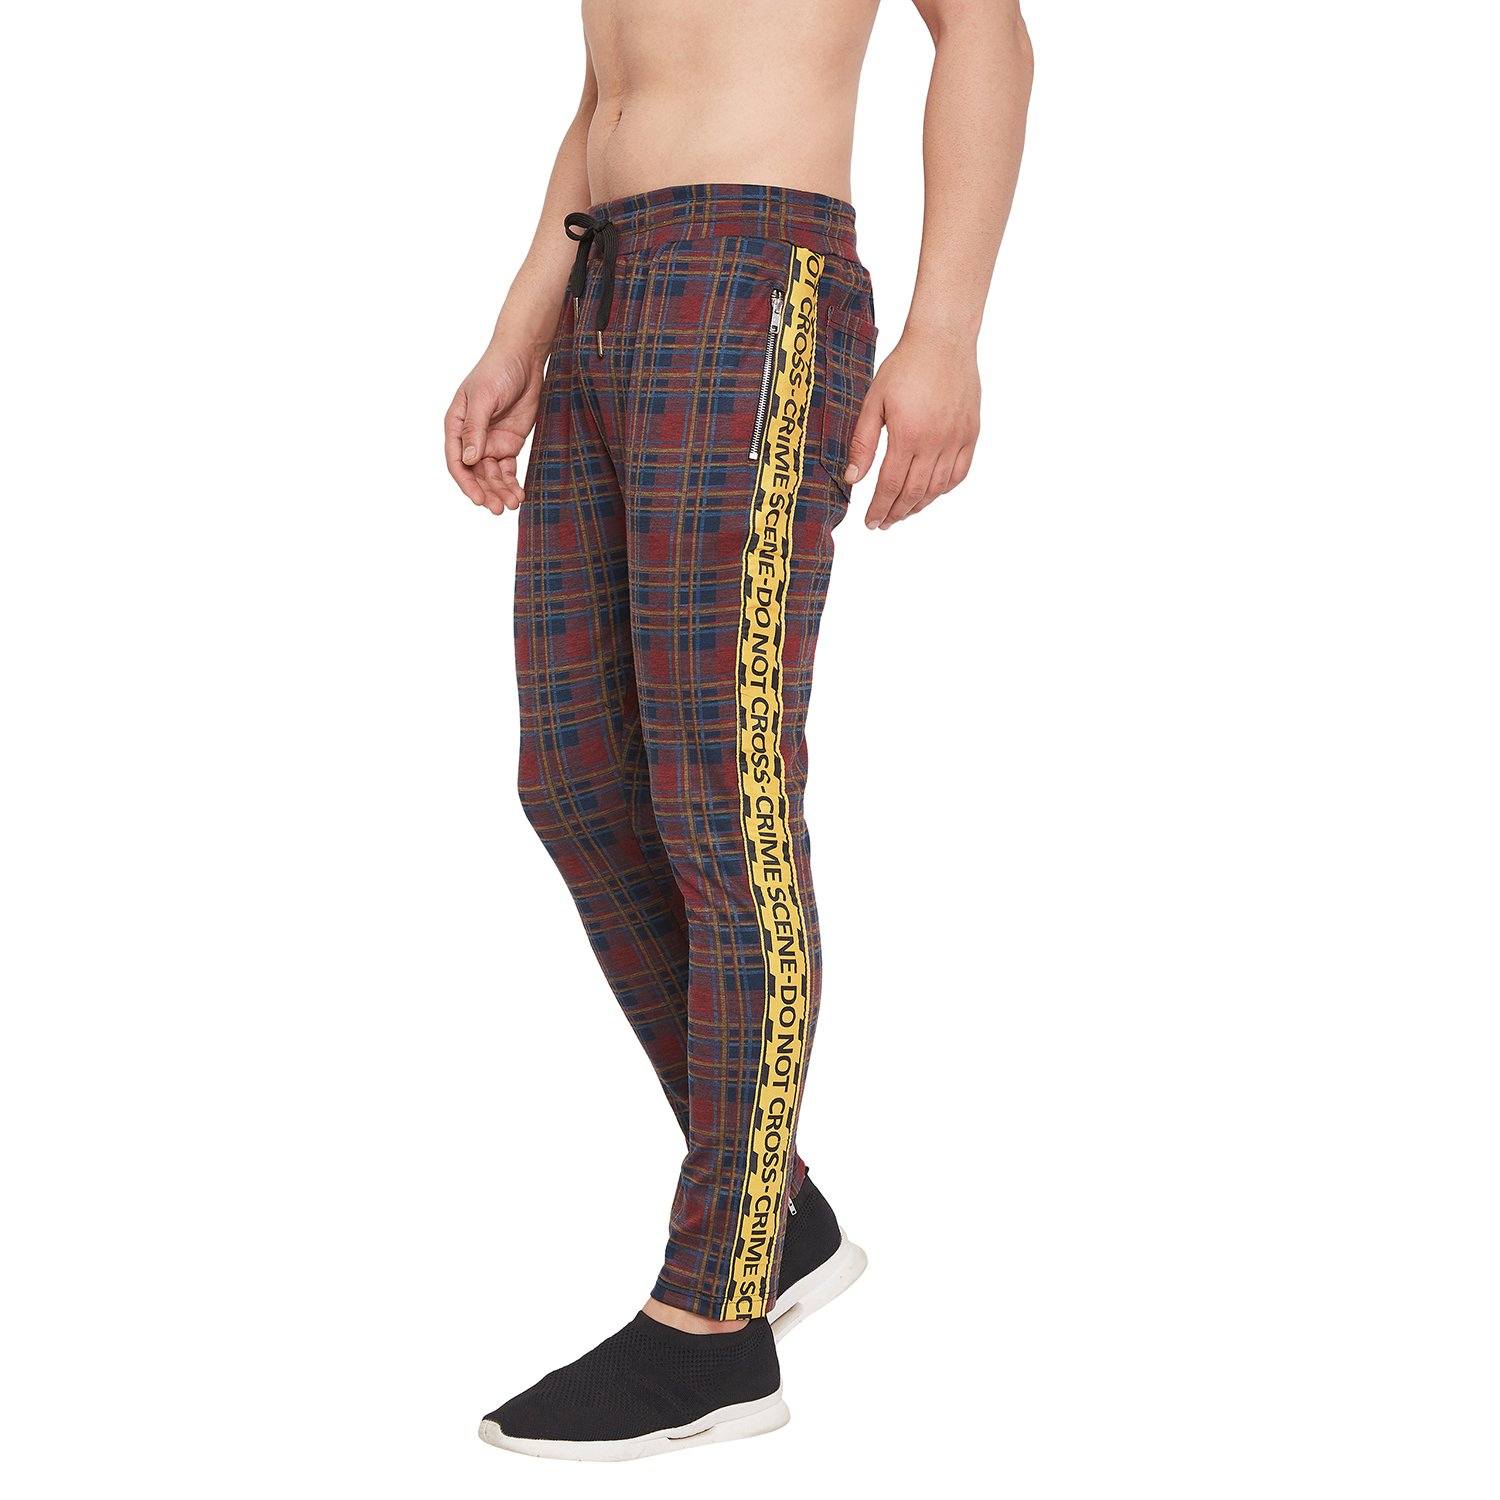 Buy KDNK Plaid Track Pants with Ankled Zippers at Ubuy Vietnam